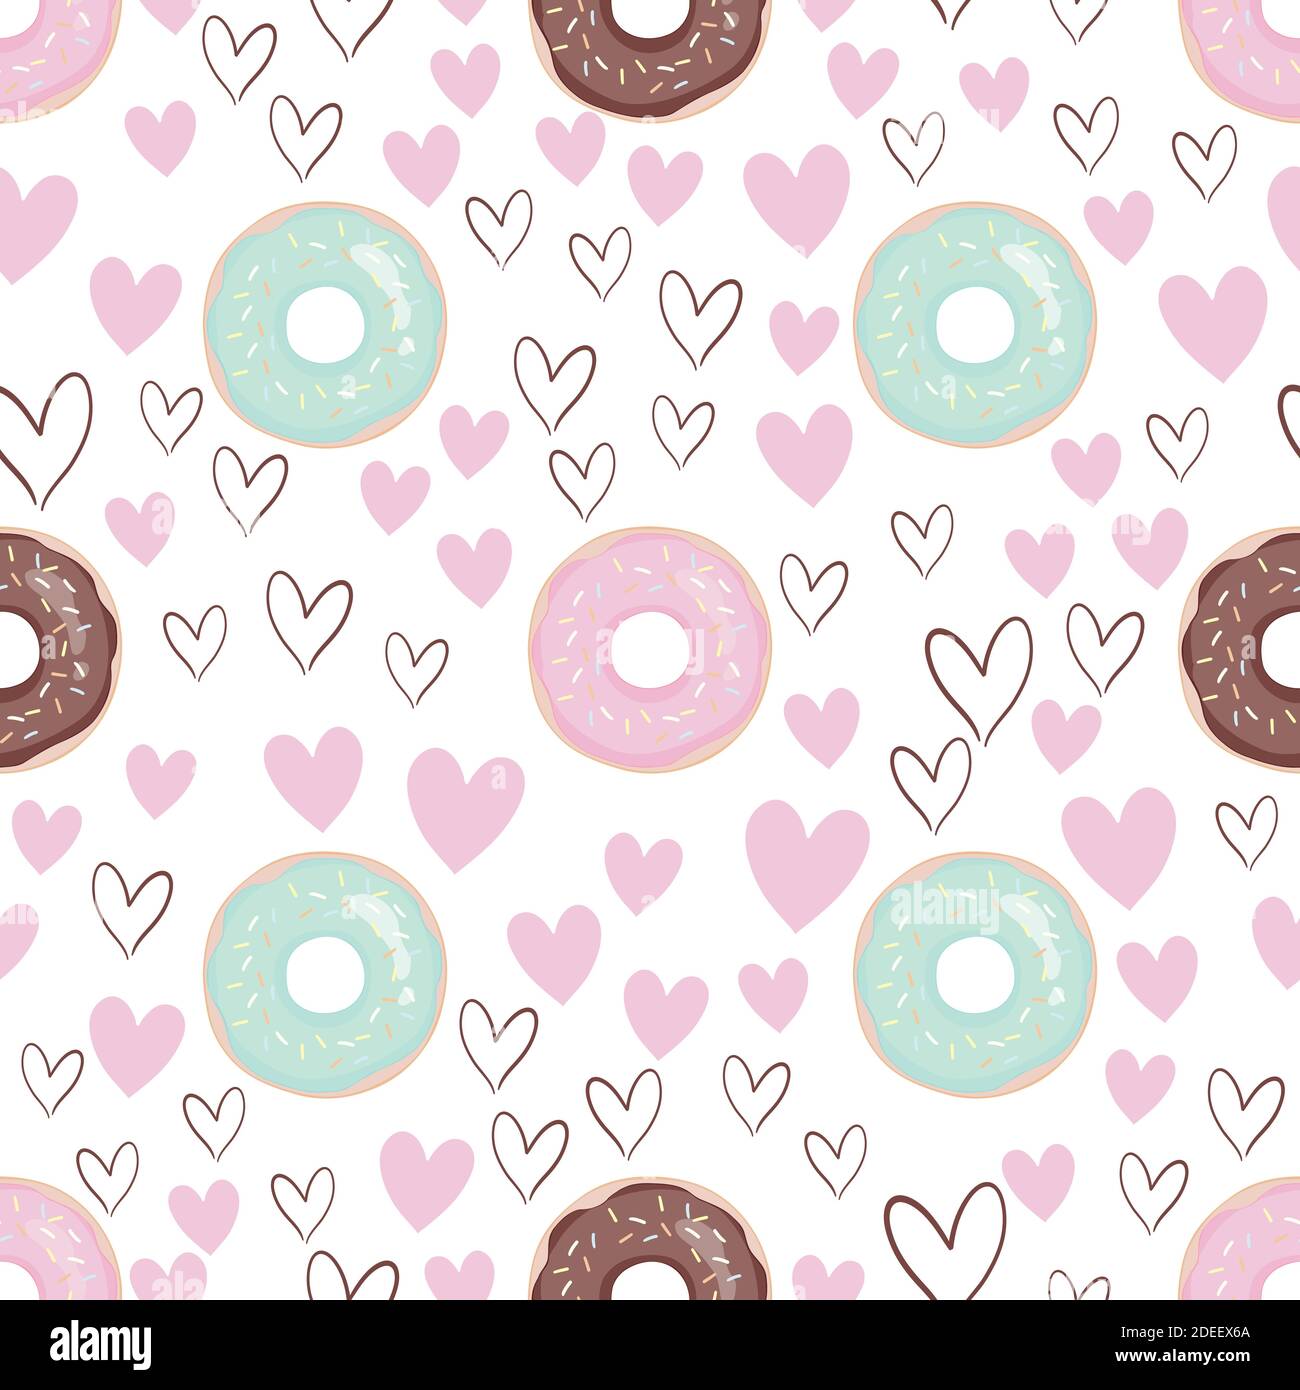 Vector Seamless Pattern With Colorful Donuts With Glaze And Sprinkles On A White Background 0788